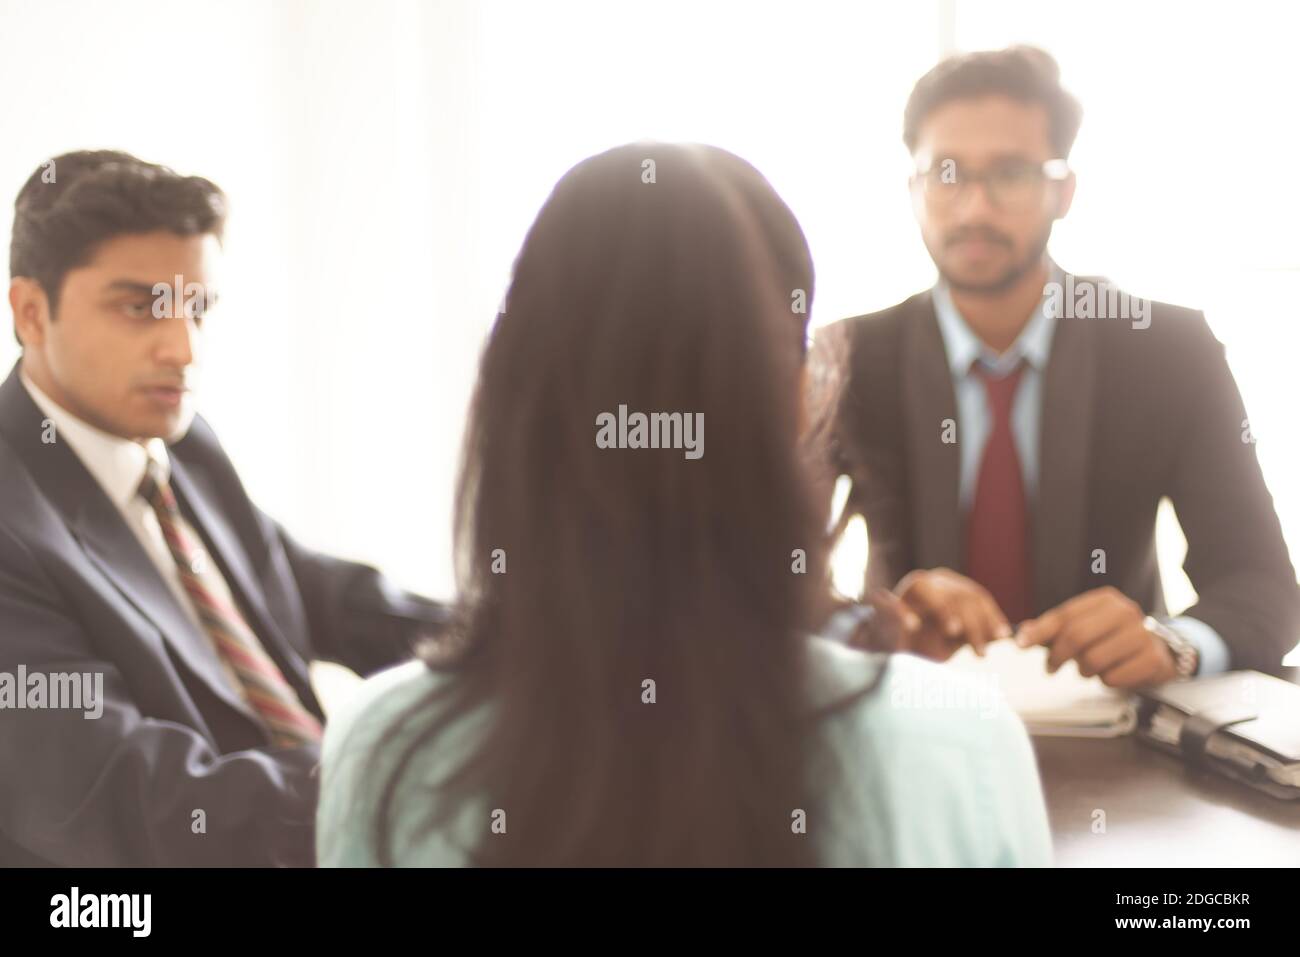 Corporate interview of a young and energetic female applicant in   Indian office taken by Indian male interviewer.  Indian corporate. Stock Photo